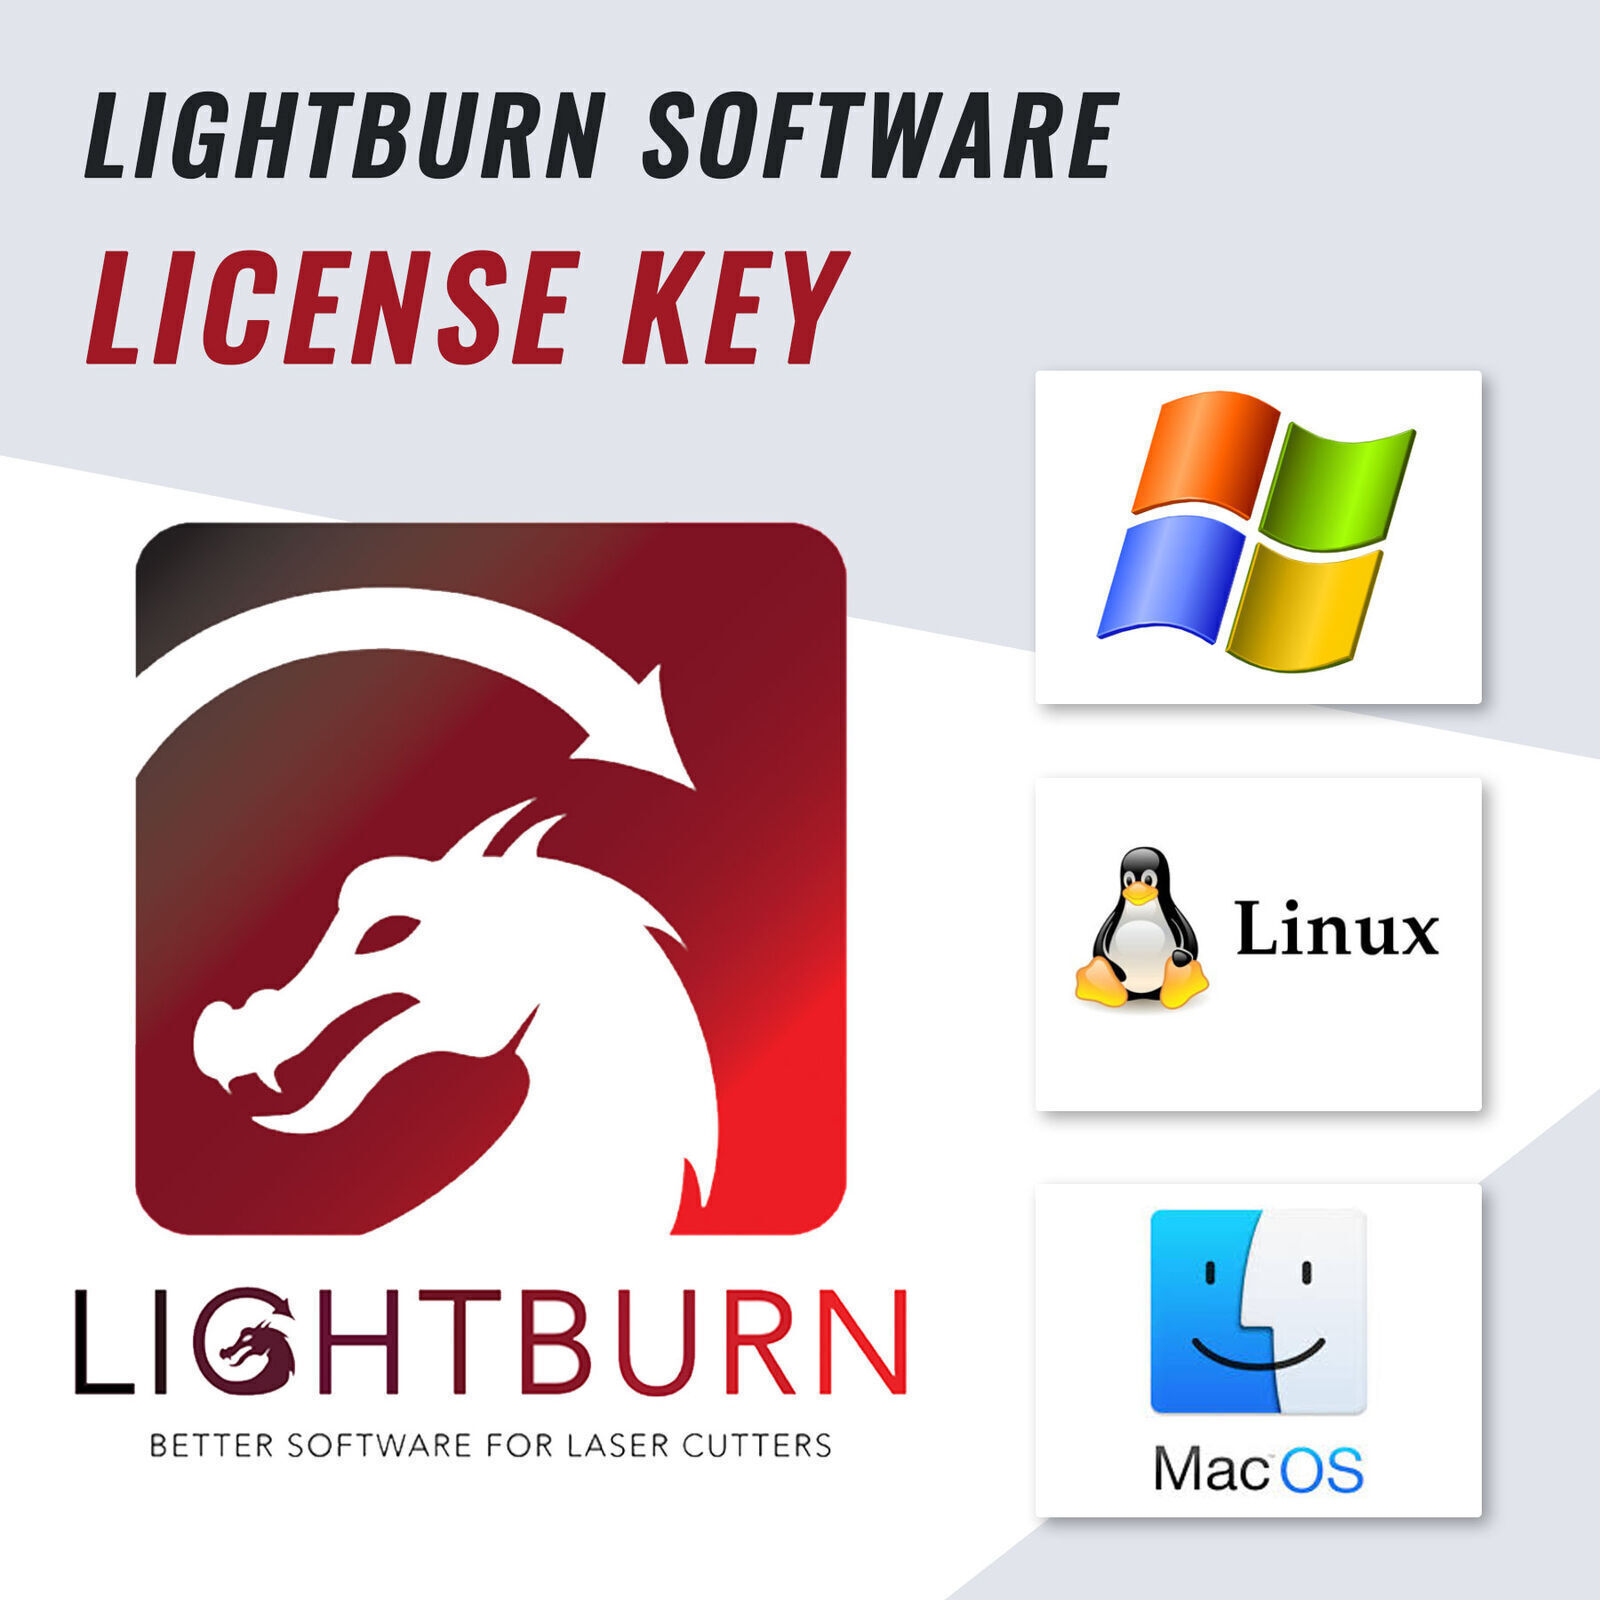 LIGHTBURN Software Code License Key Compatible with Windows PC MacOS X Linux